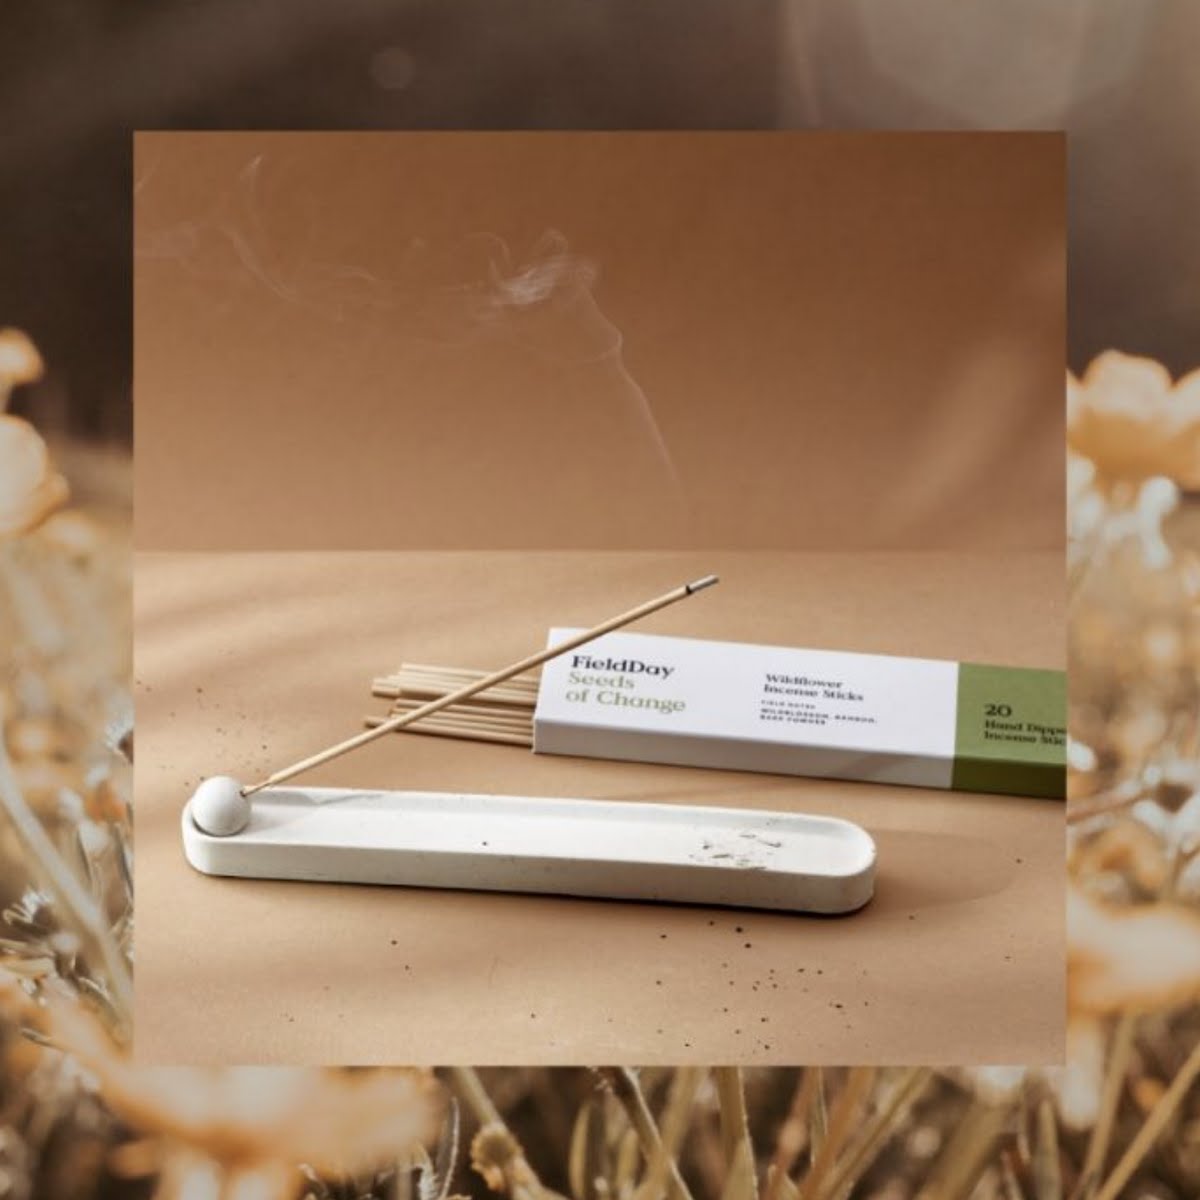 Seeds of Change Incense Bundle, €30, Field Day